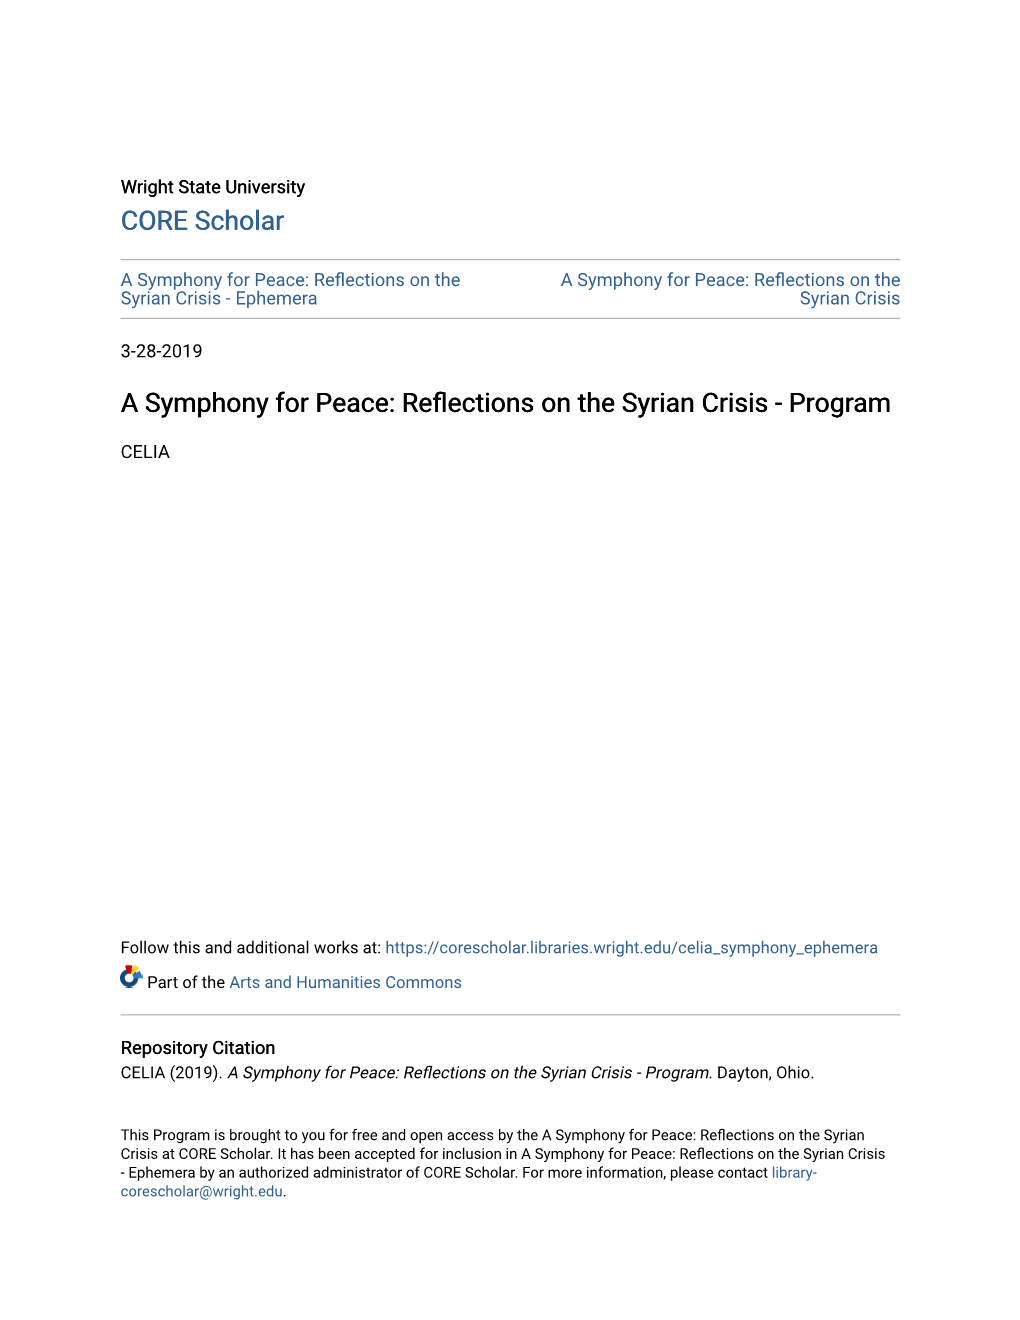 A Symphony for Peace: Reflections on the Syrian Crisis - Ephemera Syrian Crisis